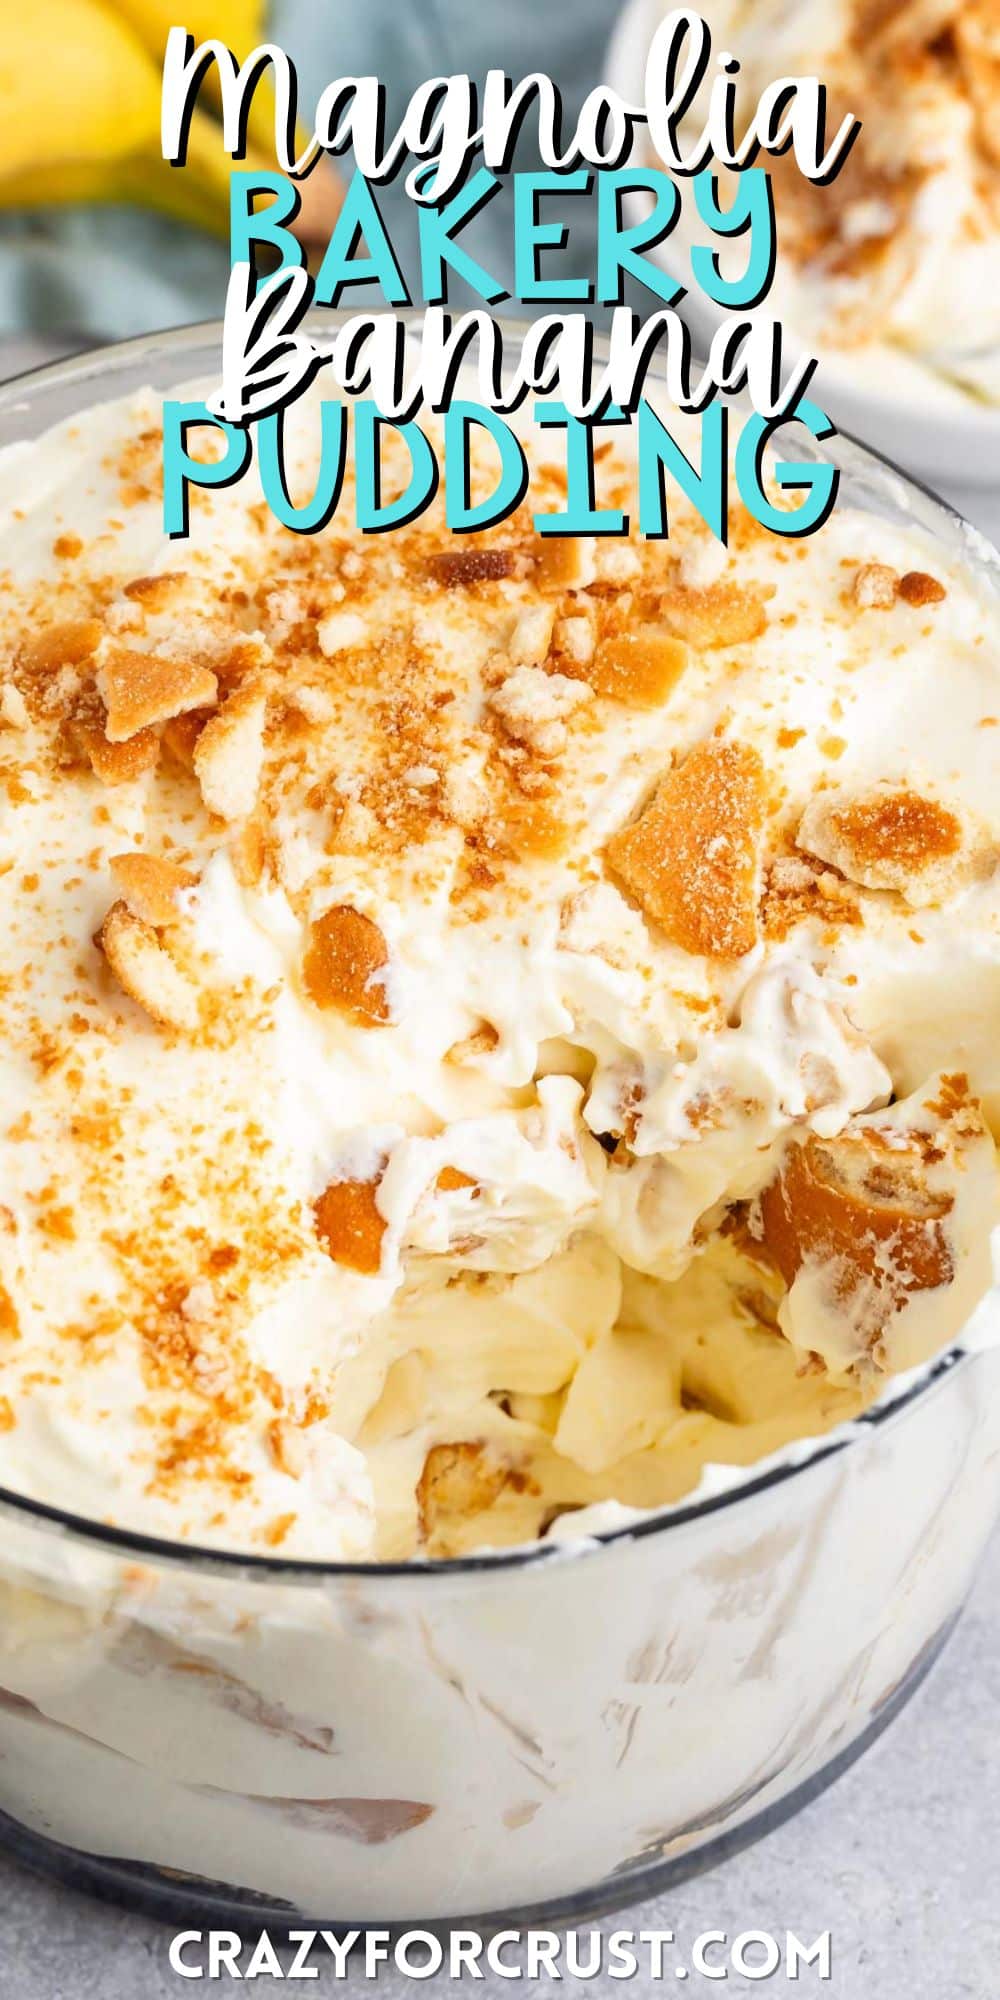 banana pudding in a clear glass tub with sliced bananas and cream inside with words on the image.